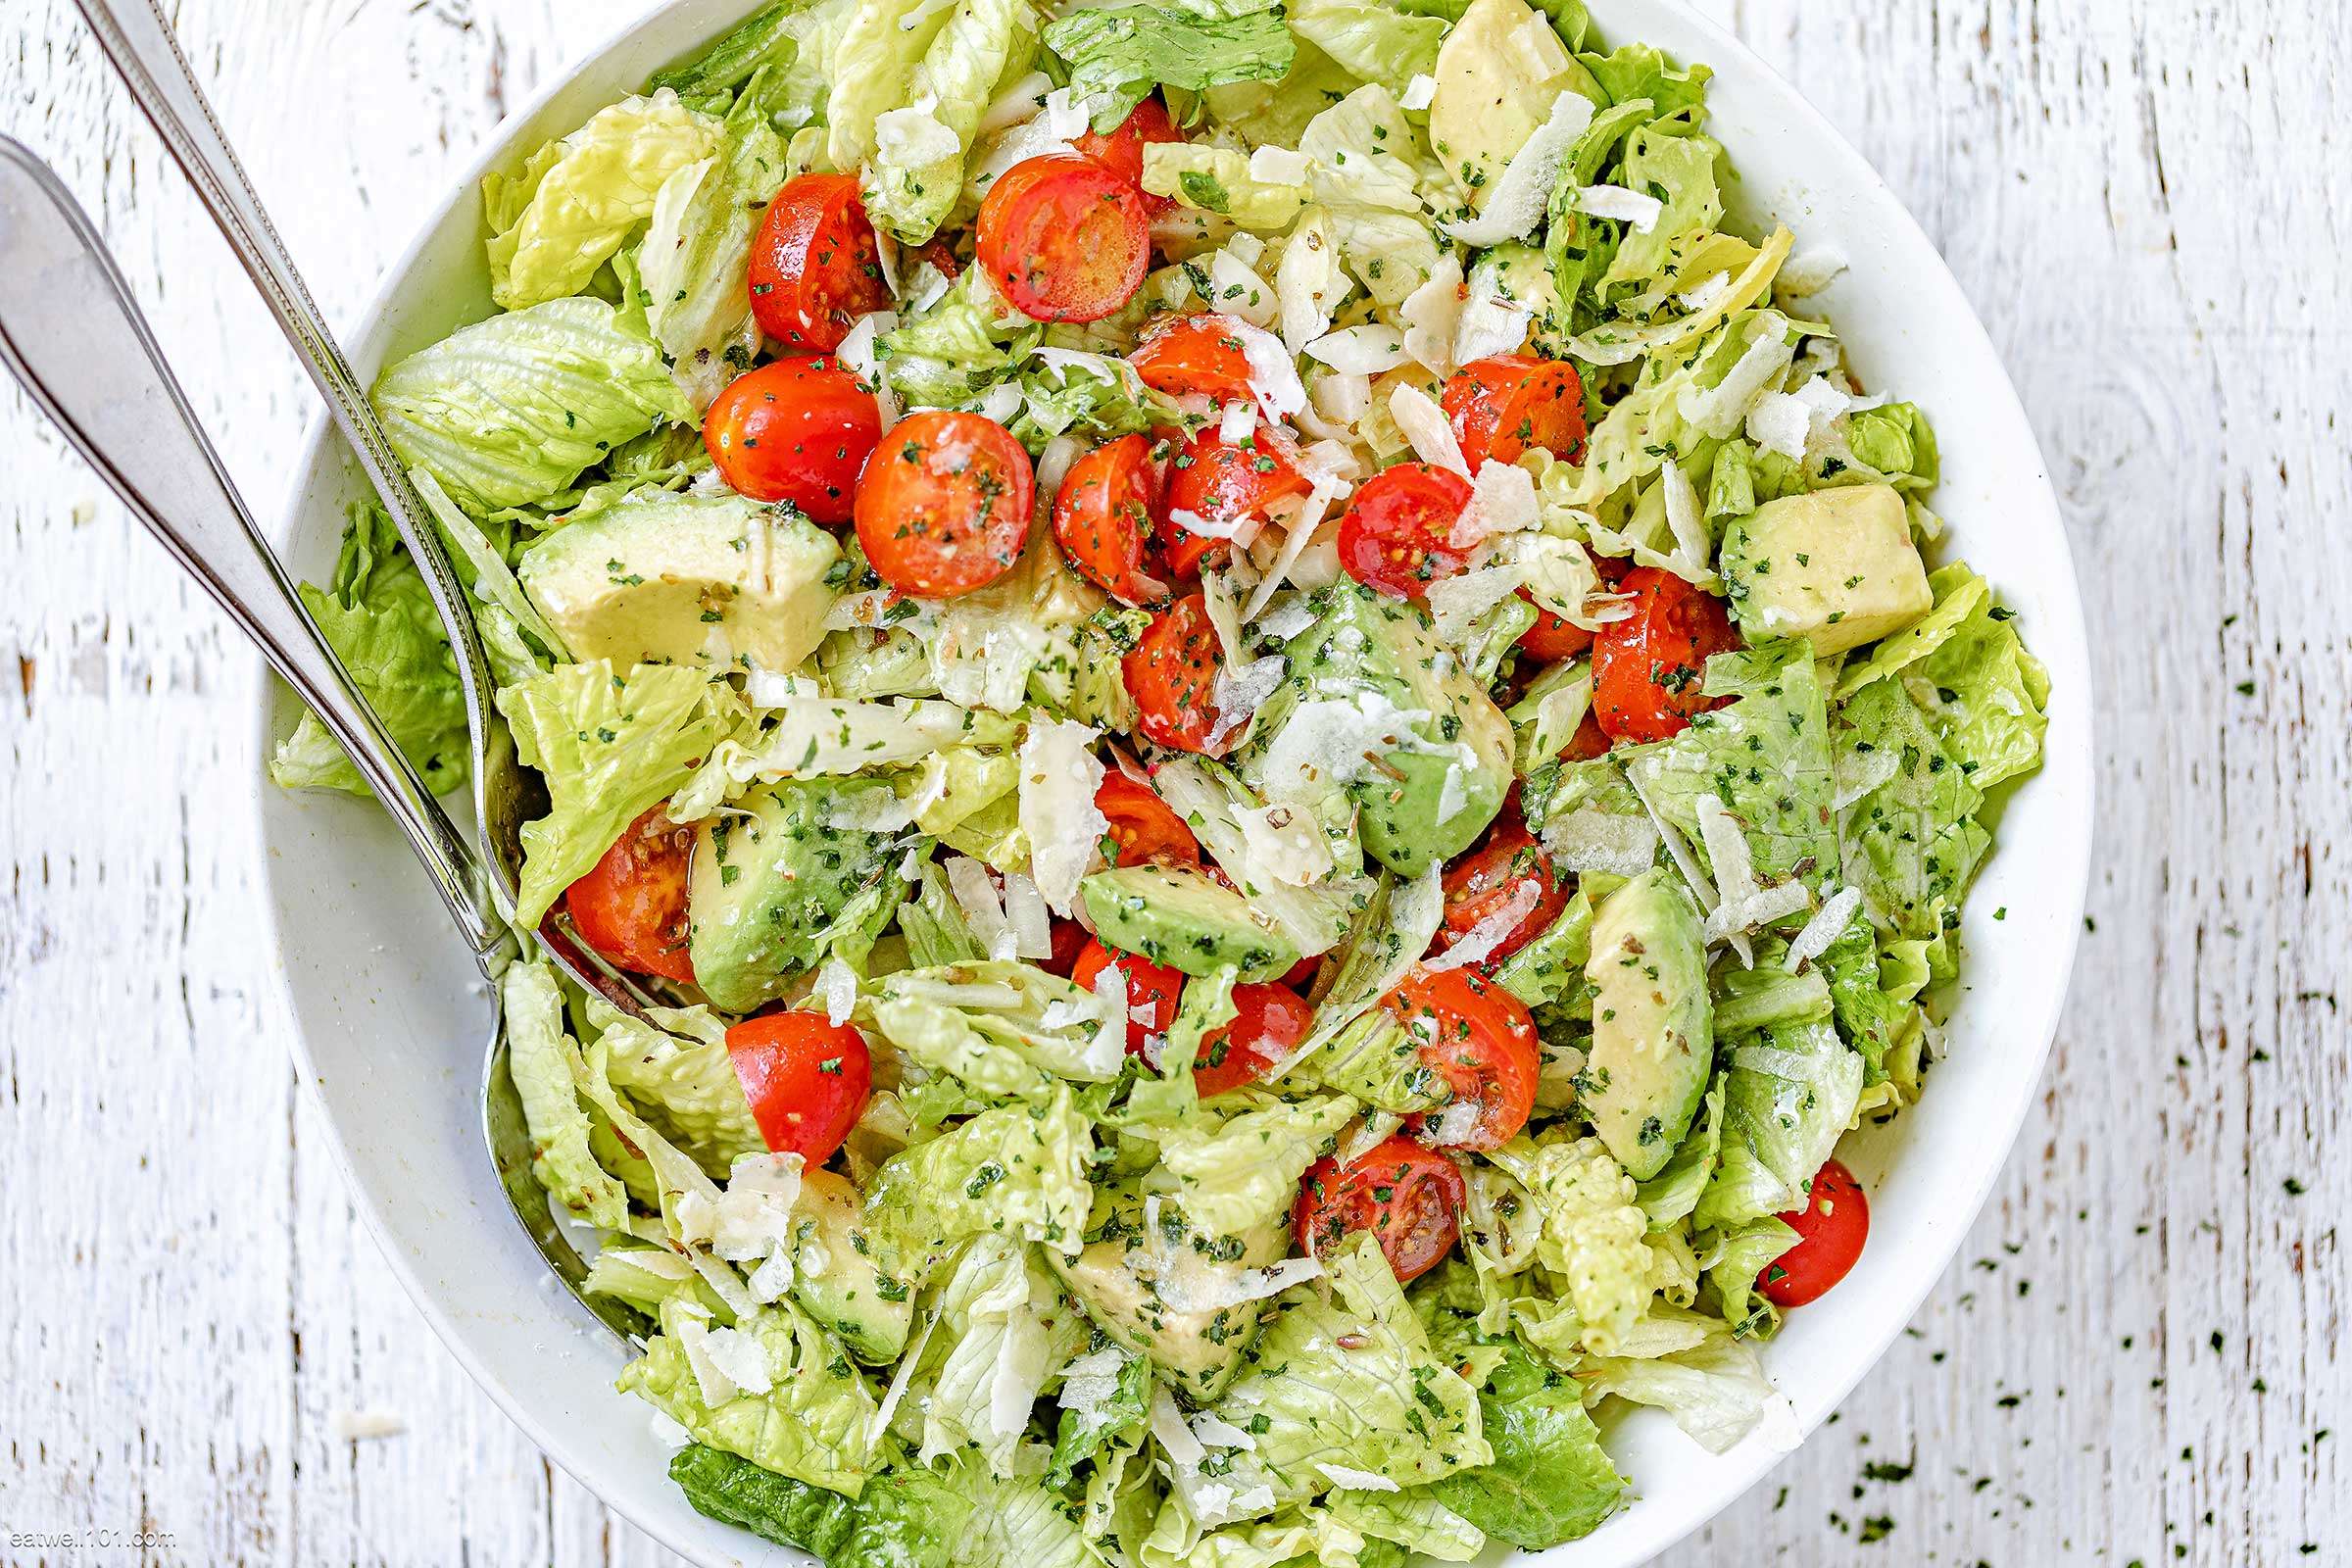 Vegetable Salad Recipes: 60 Easy Vegetable Salads for Light Lunches ...